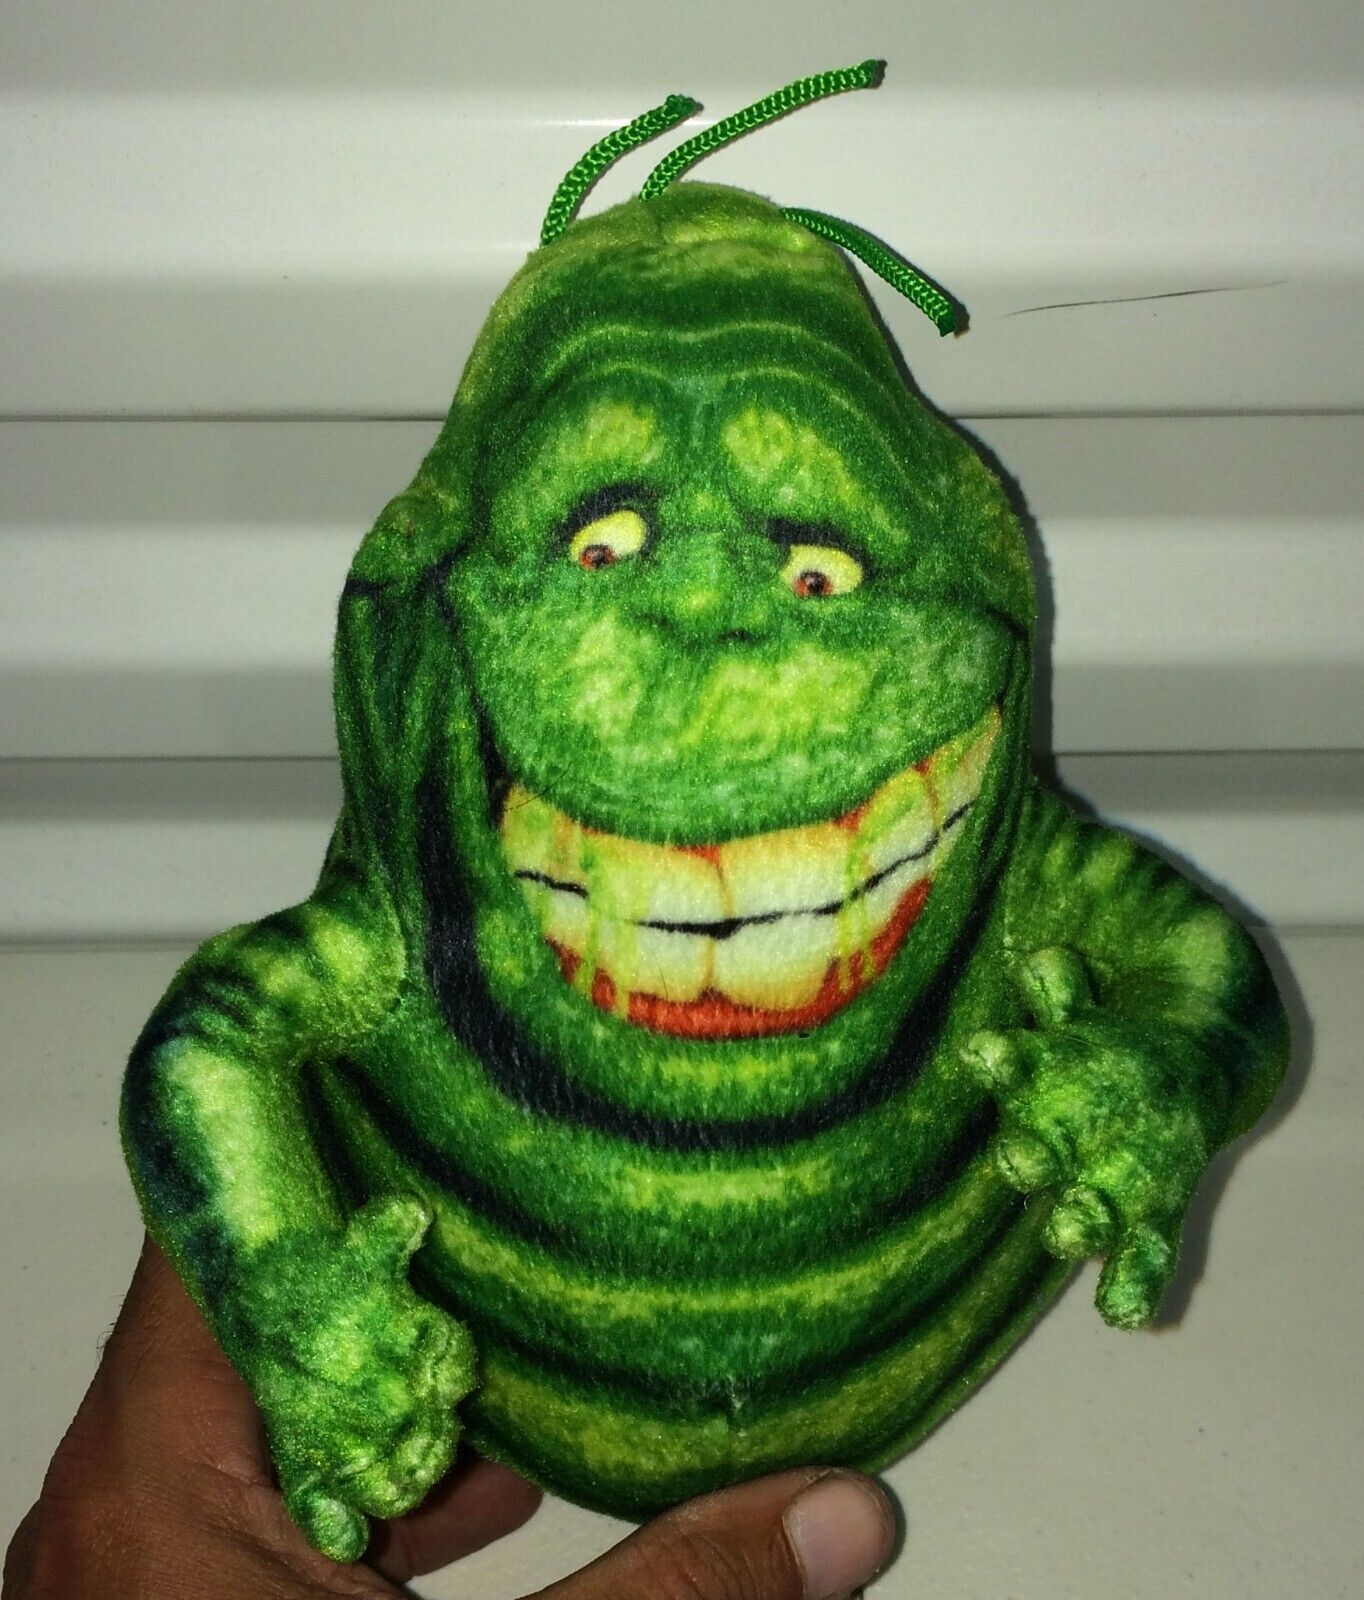 2016 Toy Factory Ghostbusters Slimer Monster 9" Plush Stuffed Animal Toy Green - $14.50